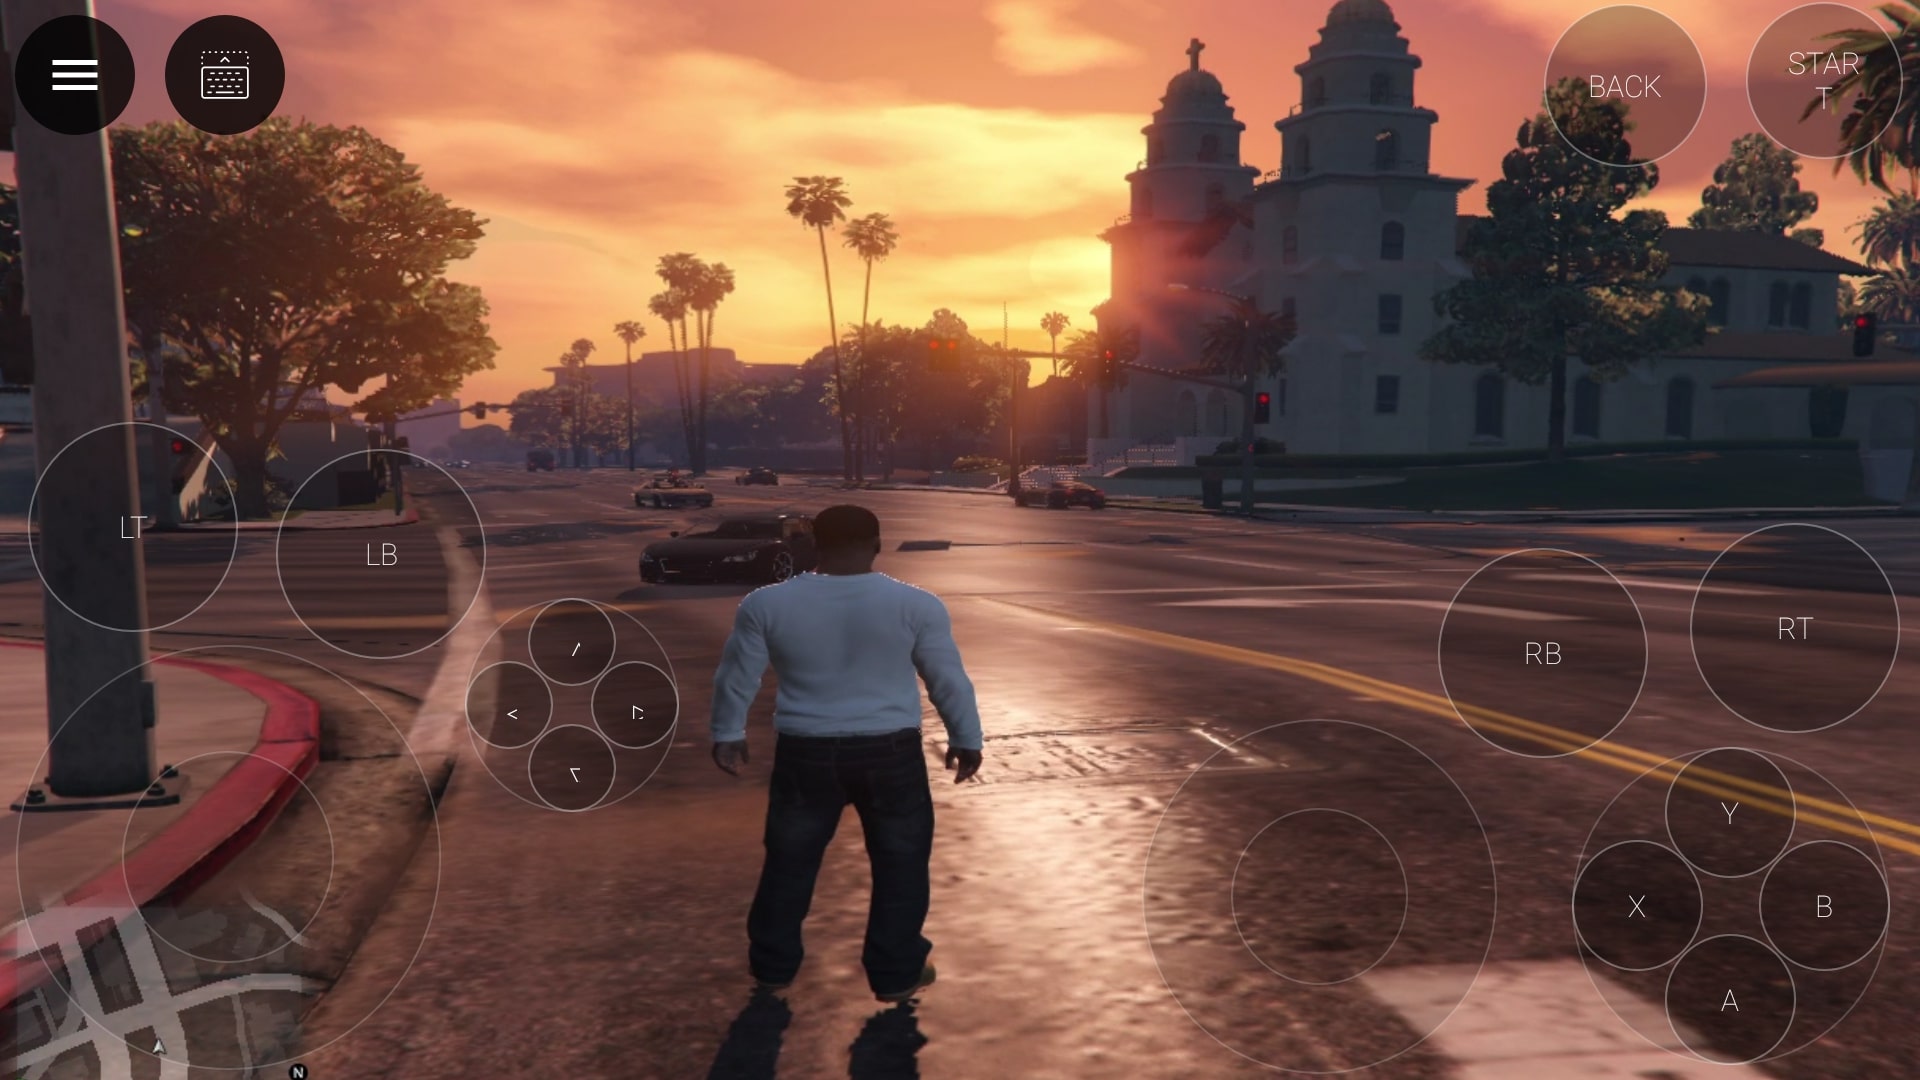 Things You Have to Know While Playing GTA V